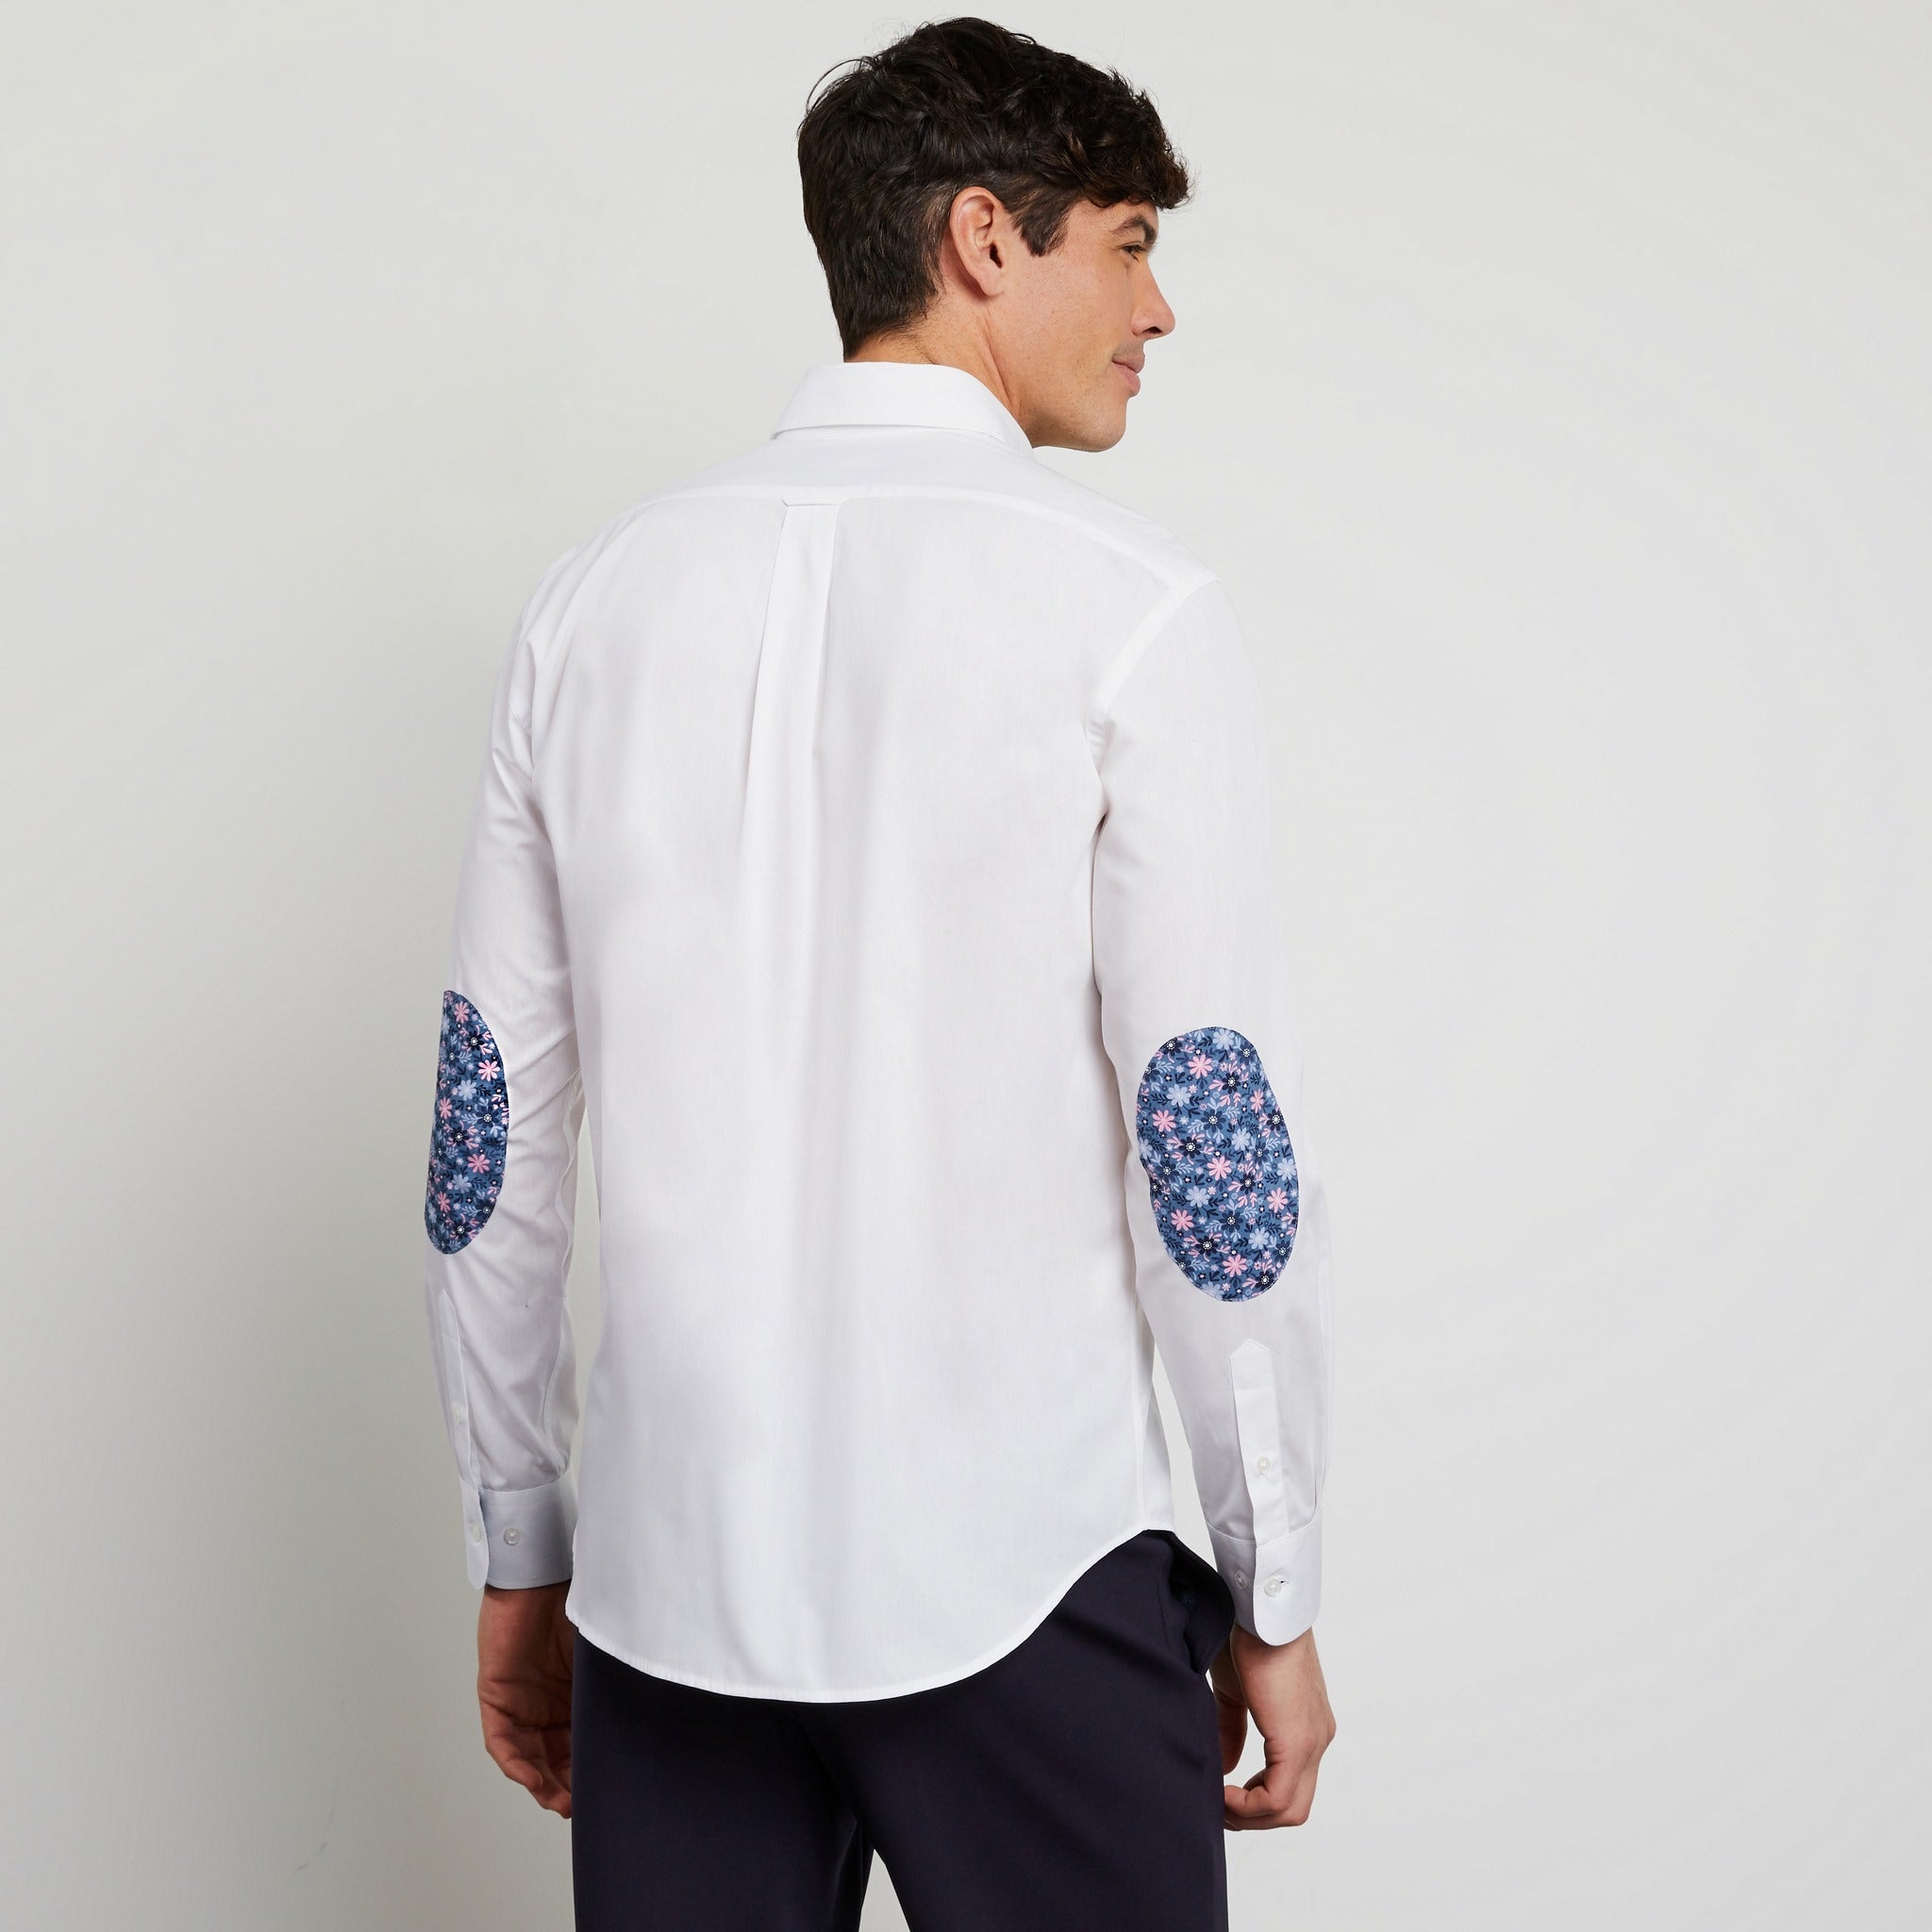 White Shirt With Decorative Elbow Patches - 03